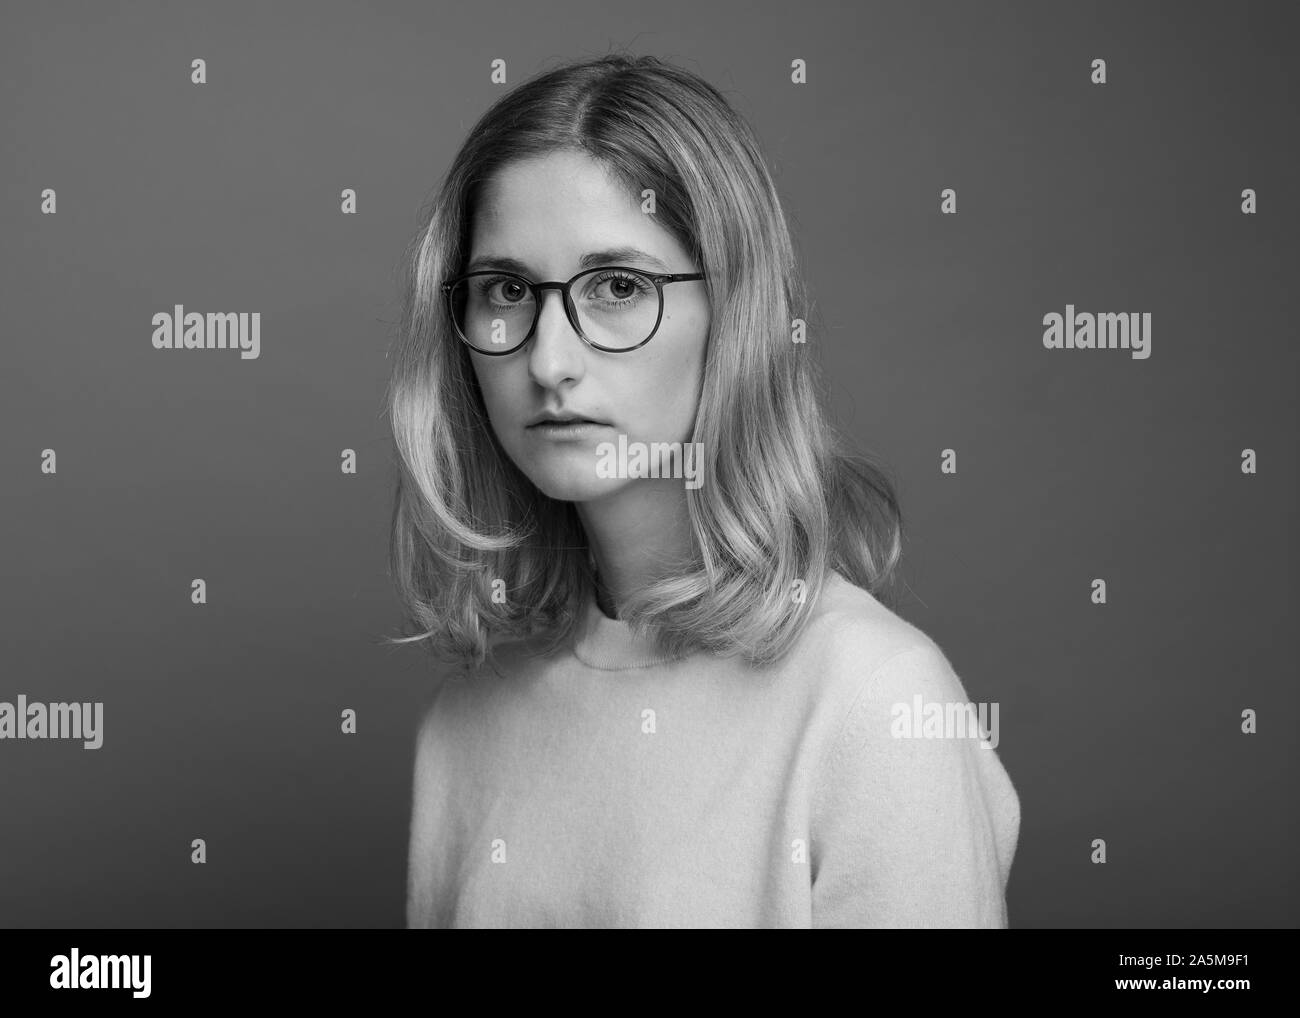 Black and white image of woman wearing glasses Stock Photo